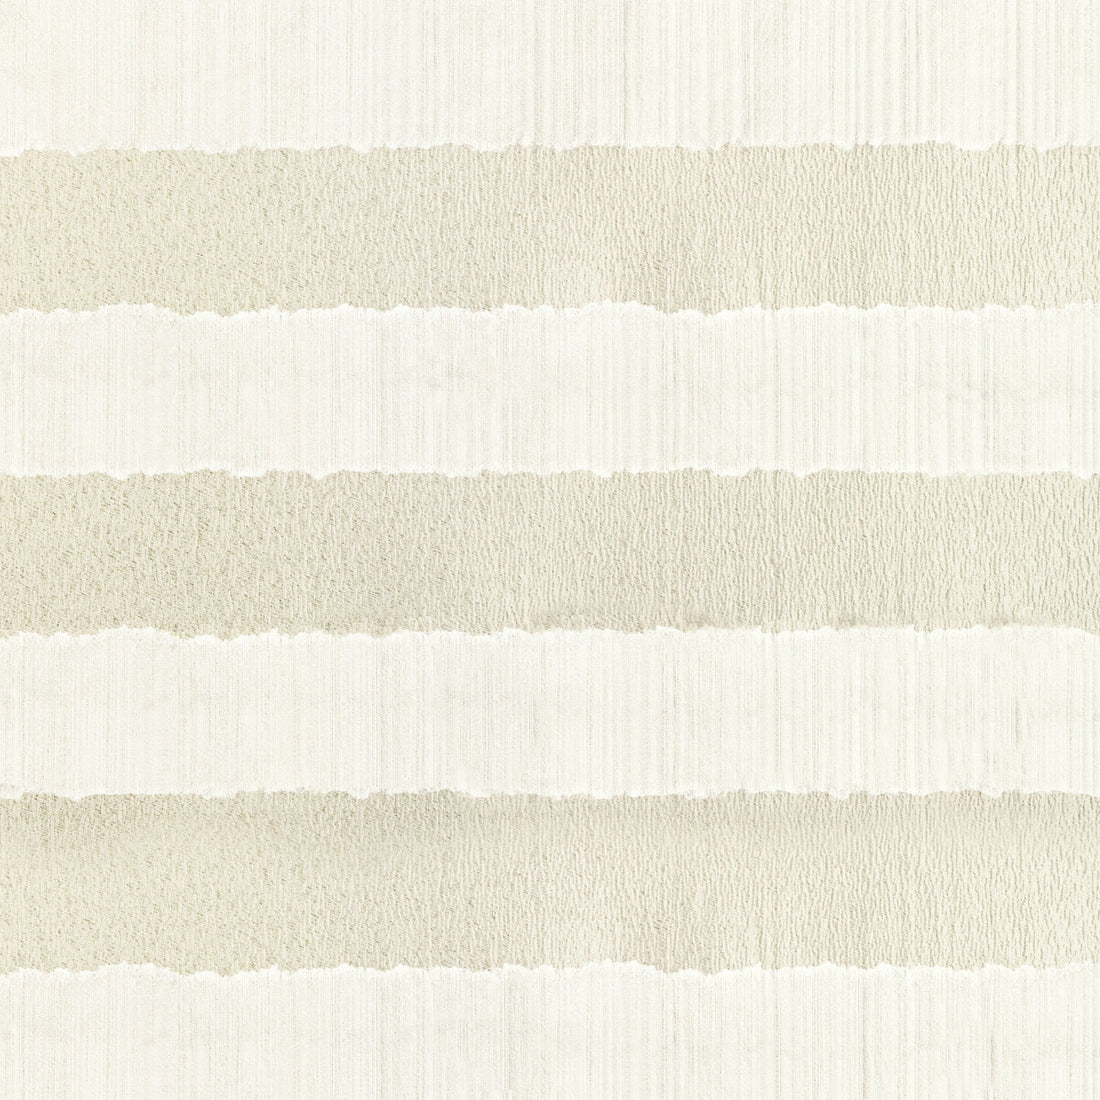 Vantage fabric in pearl color - pattern 4955.1116.0 - by Kravet Couture in the Modern Luxe Silk Luster collection